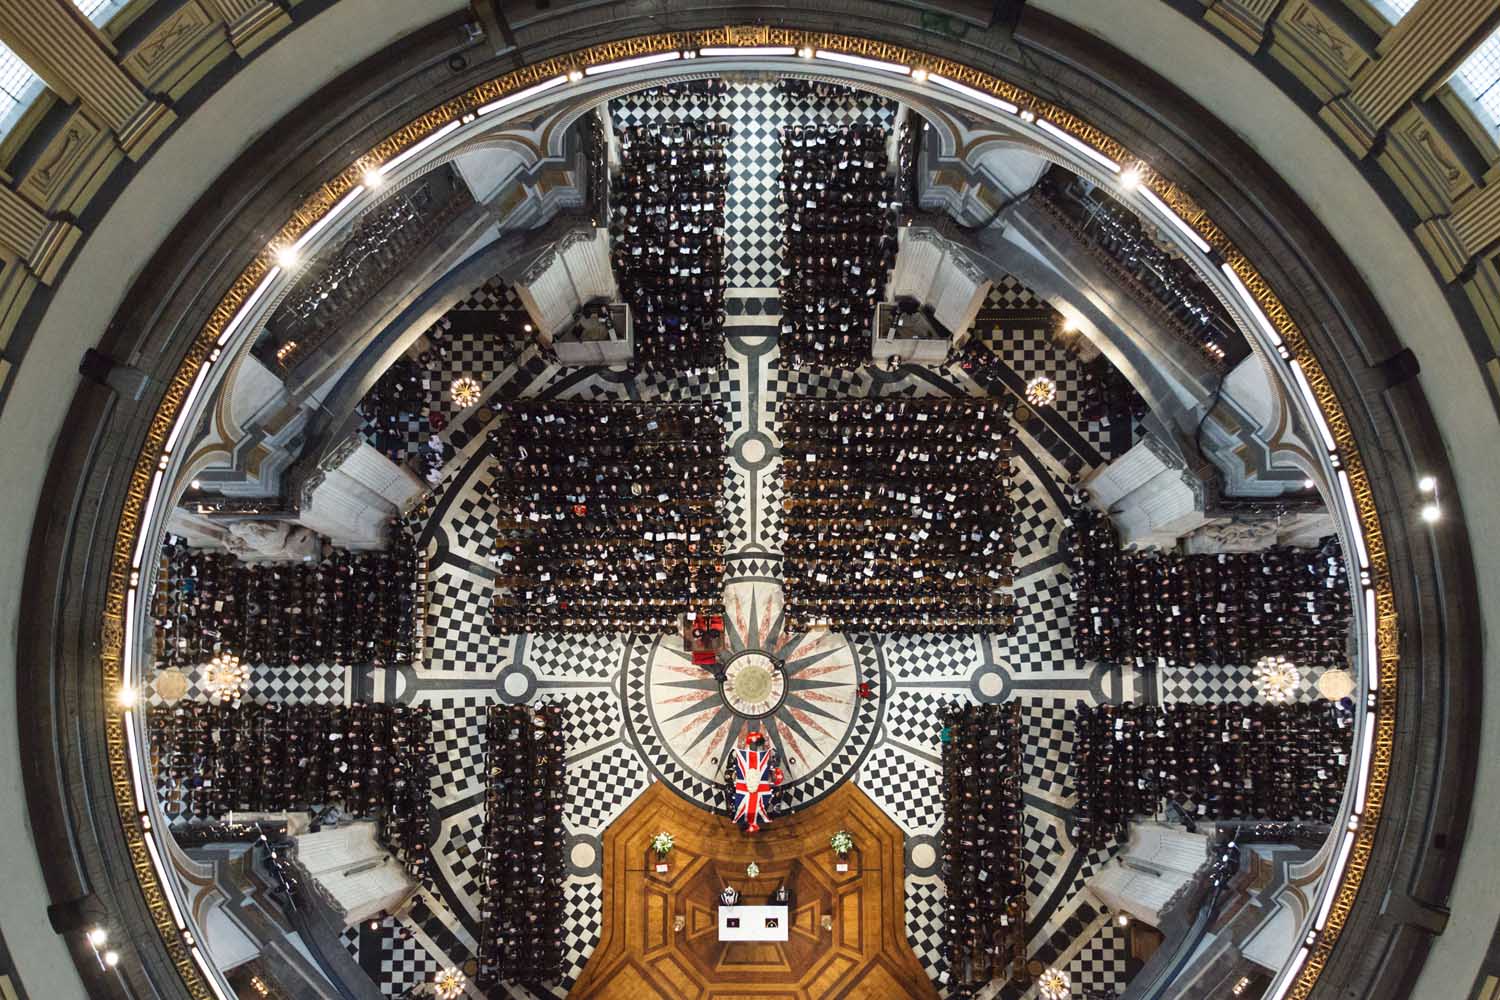 April 17, 2013. Guests take their seats during the Ceremonial funeral of former British Prime Minister Baroness Thatcher at St Paul's Cathedral in London.